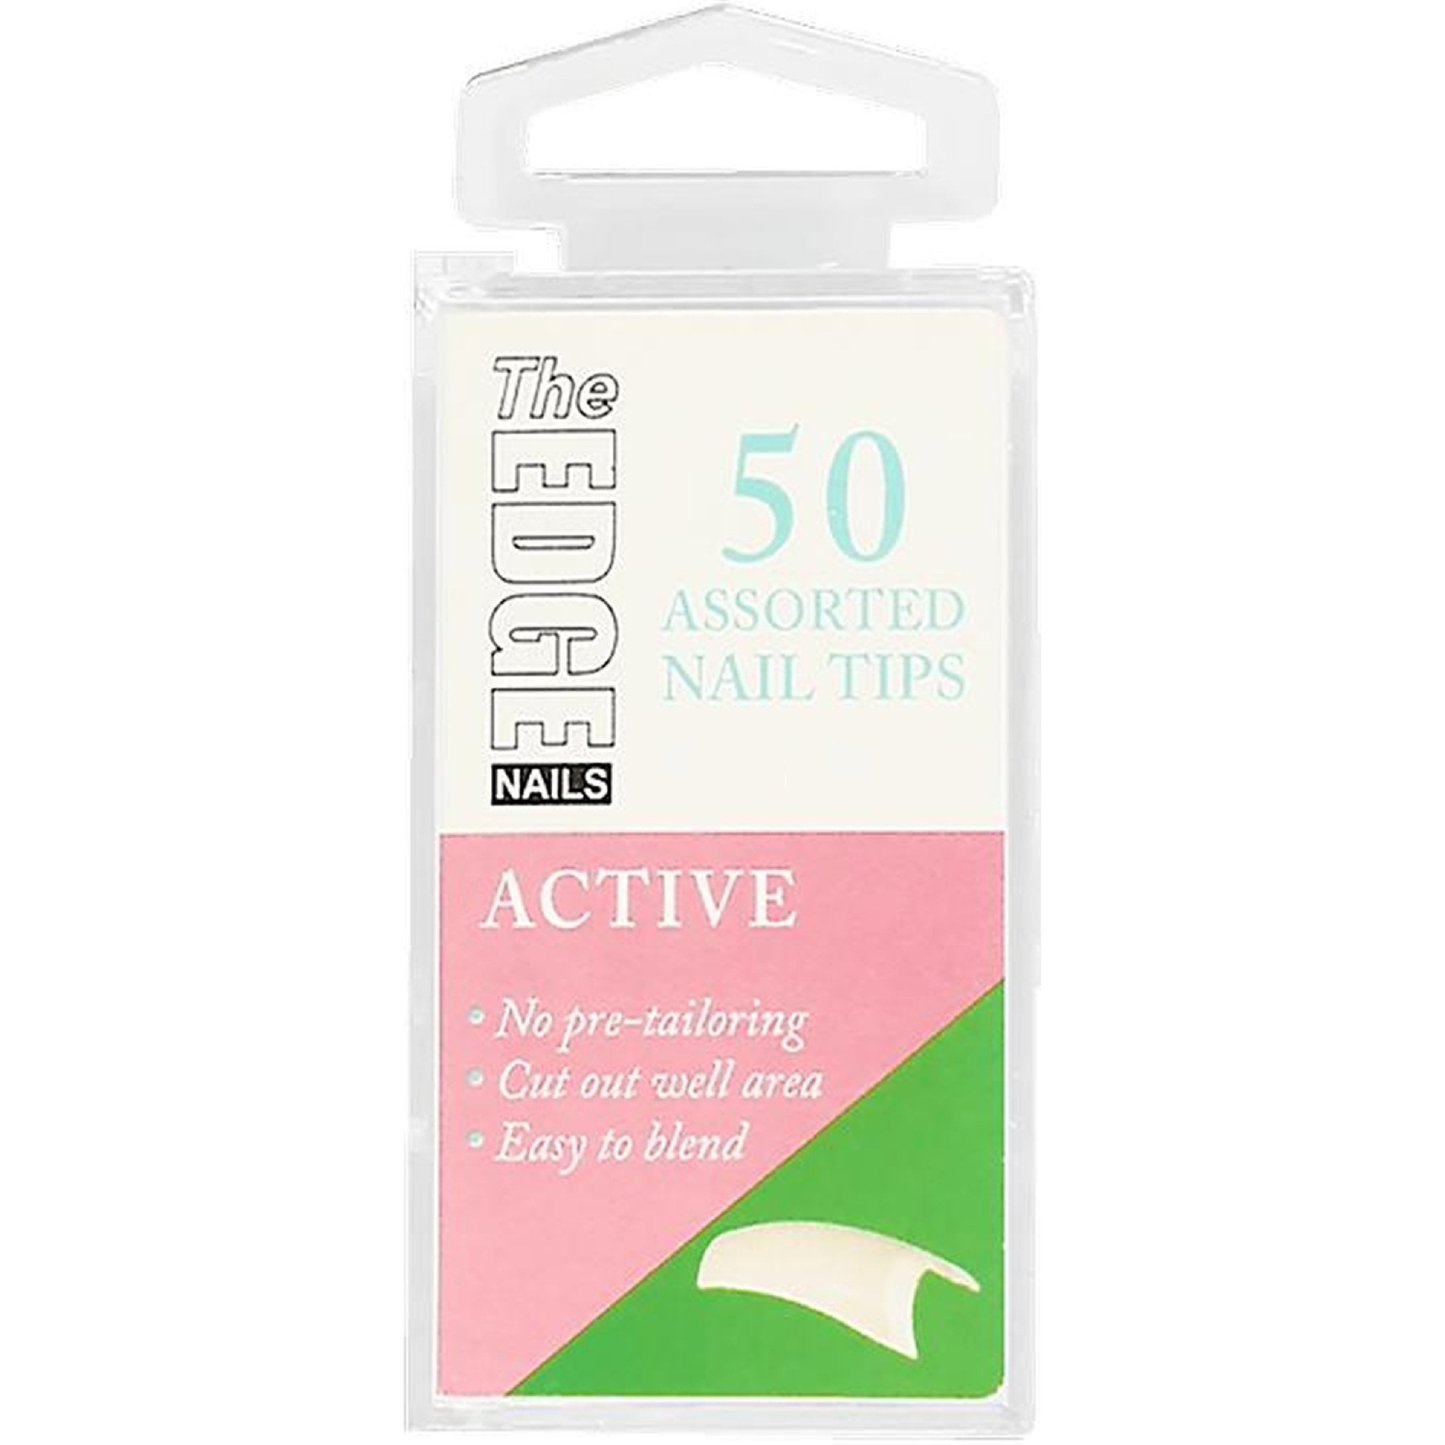 The Edge Active Nail Tips - Boxes of 50 Tips - Size 6 (SHOP)